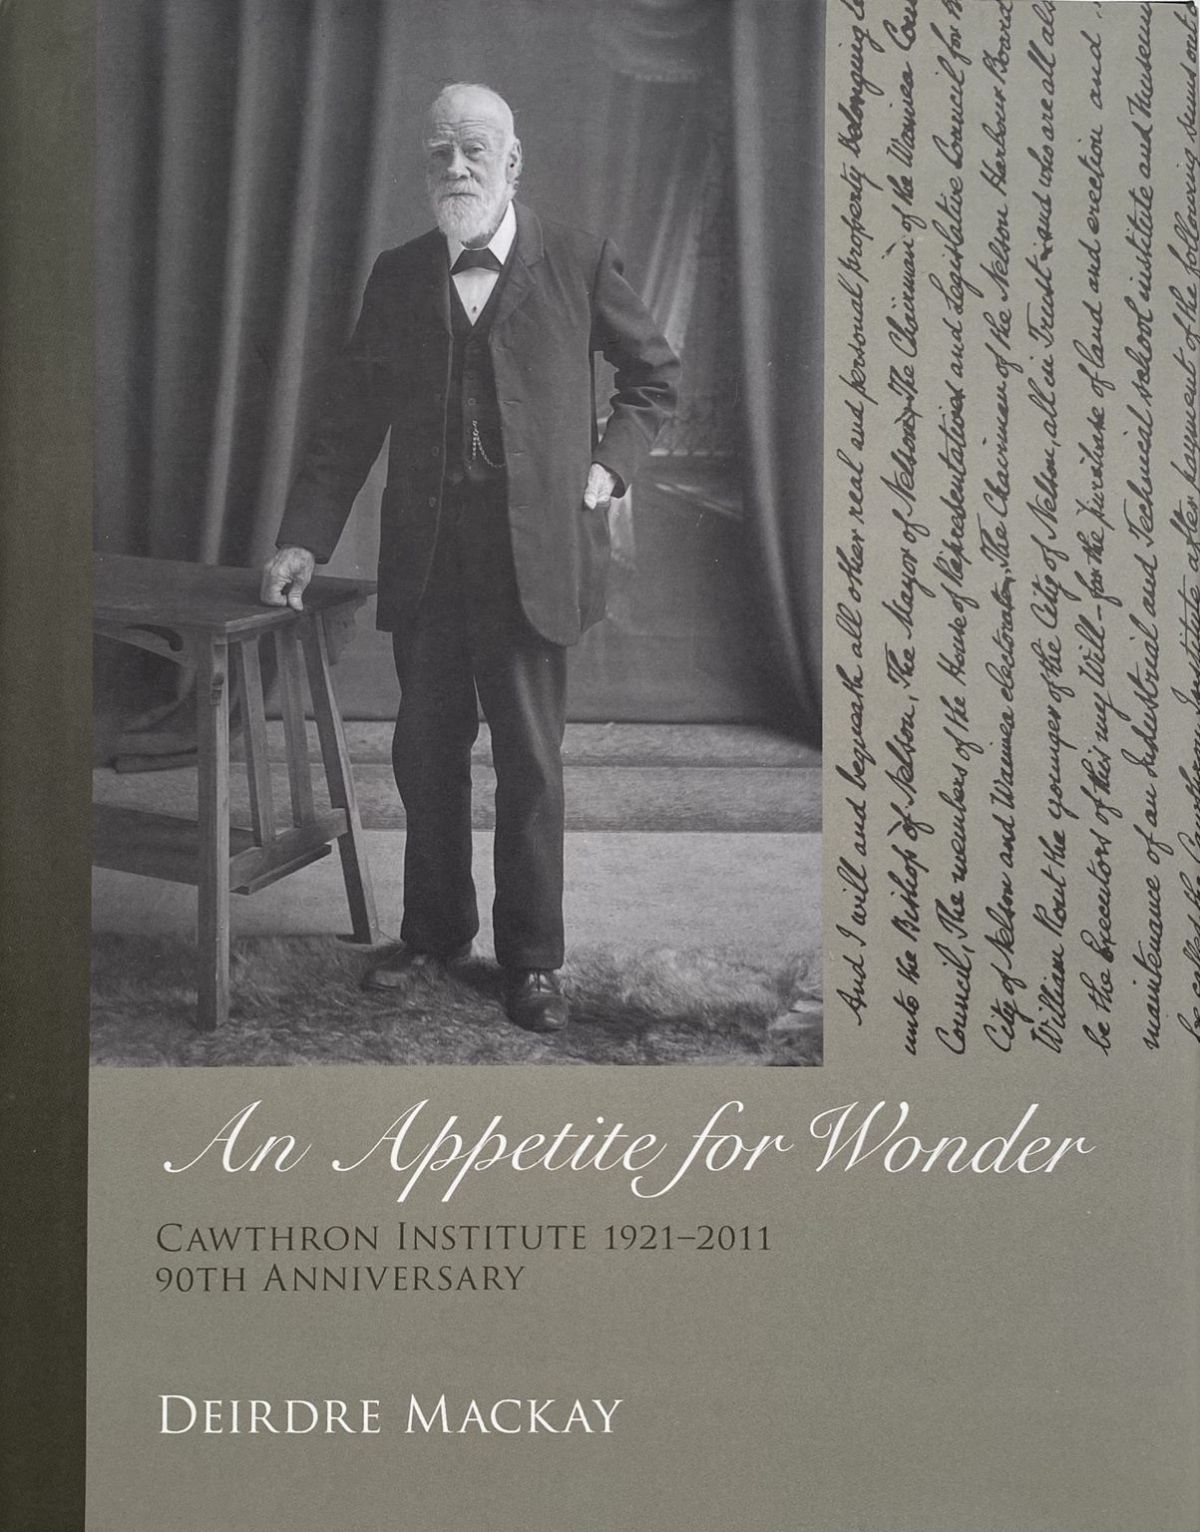 AN APPETITE FOR WONDER: Cawthron Institute 1921-2011, 90th Anniversary